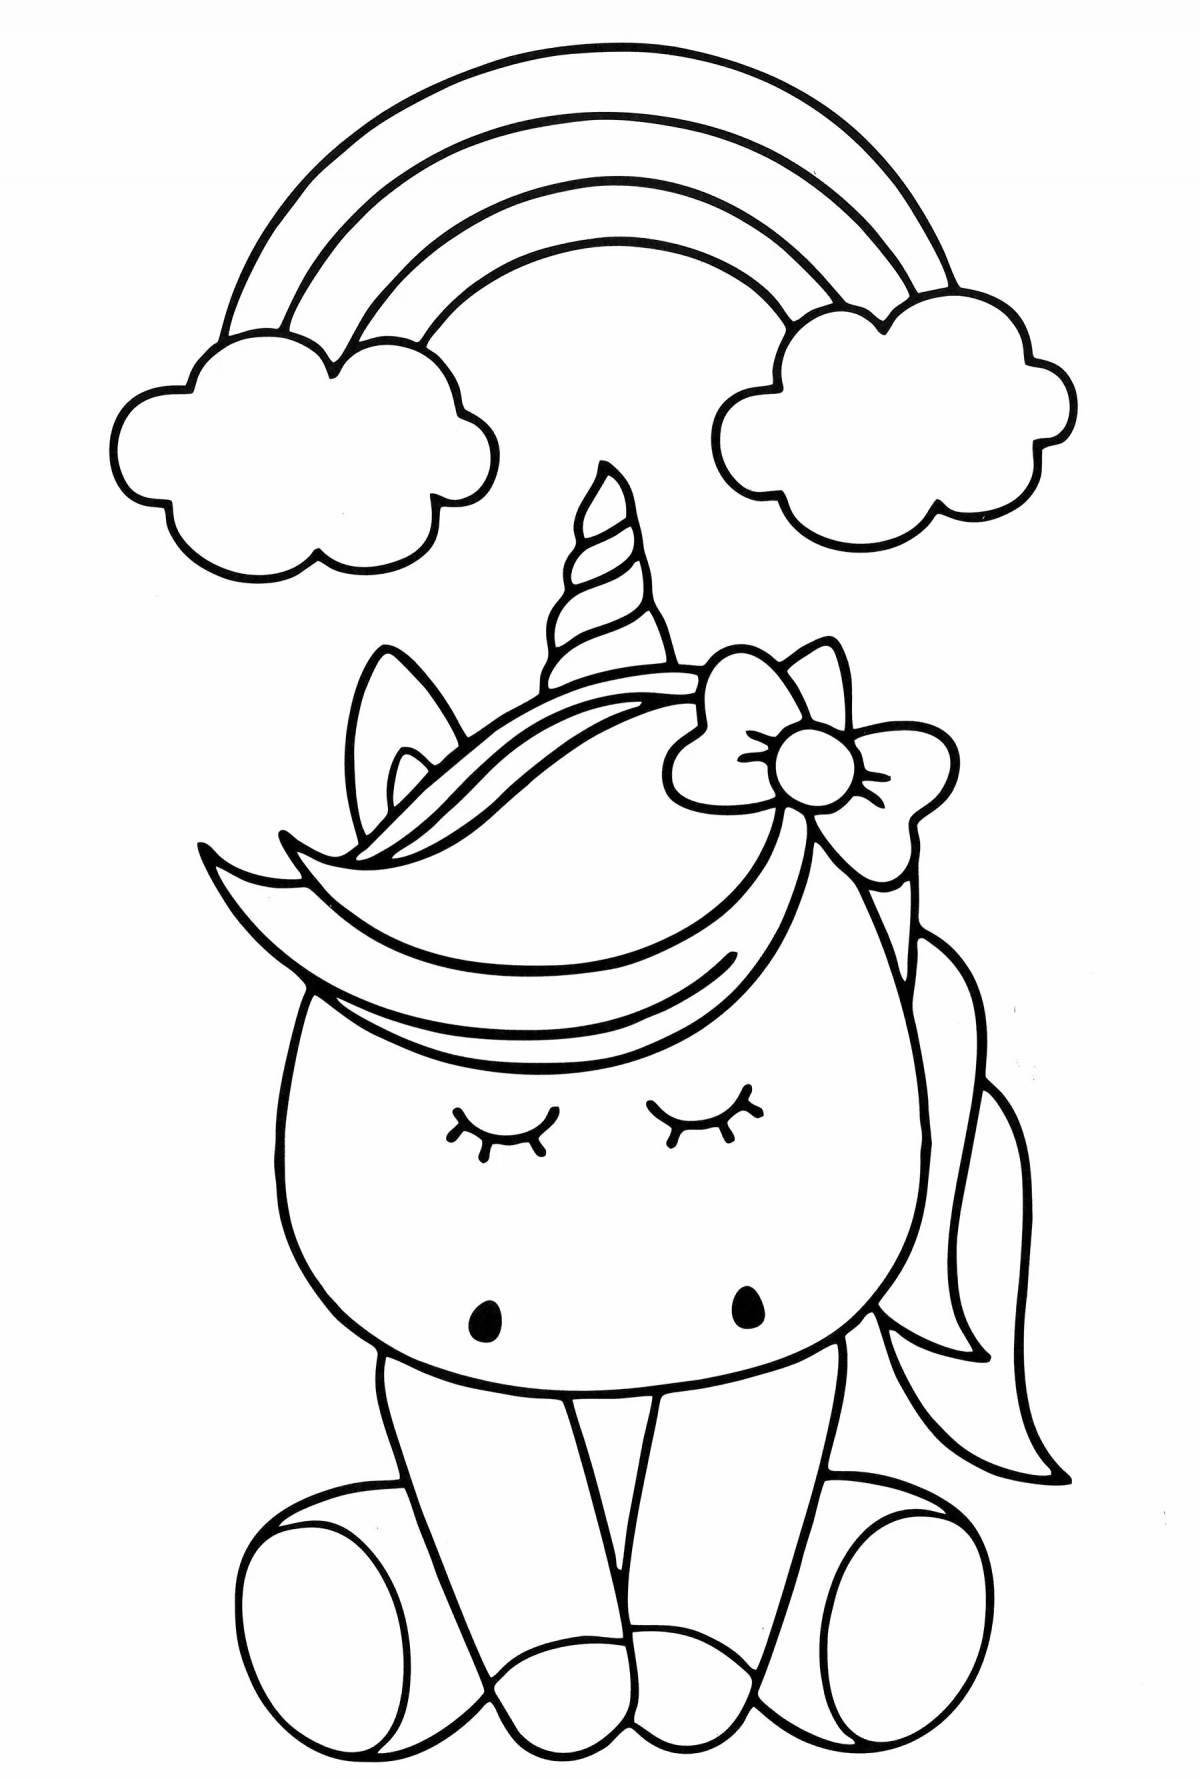 Awesome unicorn coloring book